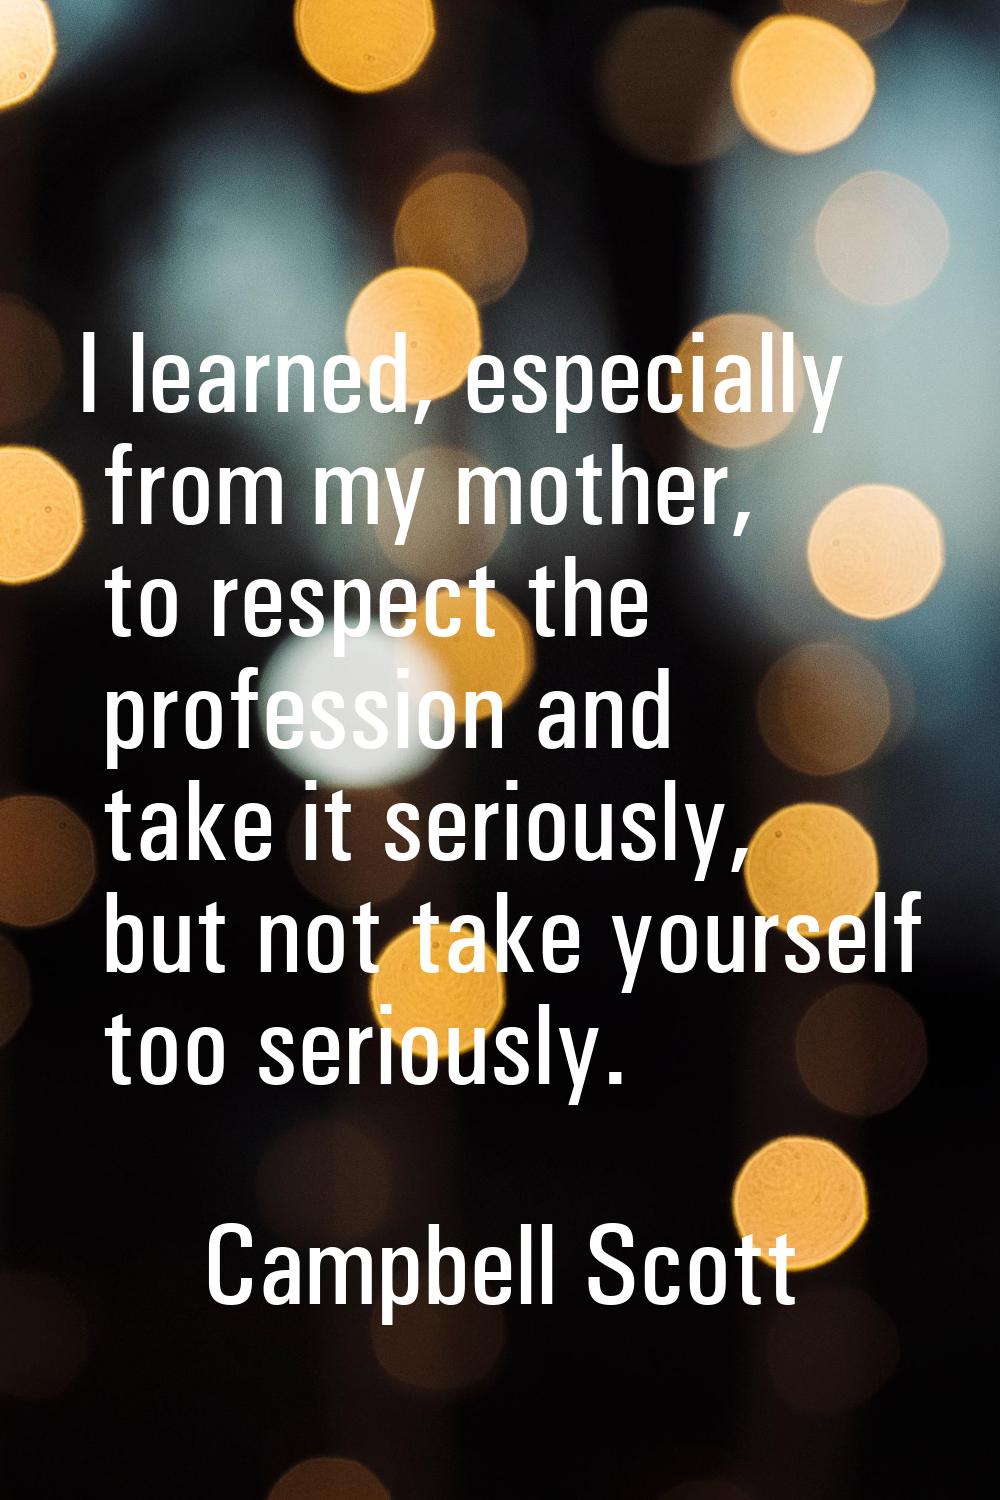 I learned, especially from my mother, to respect the profession and take it seriously, but not take